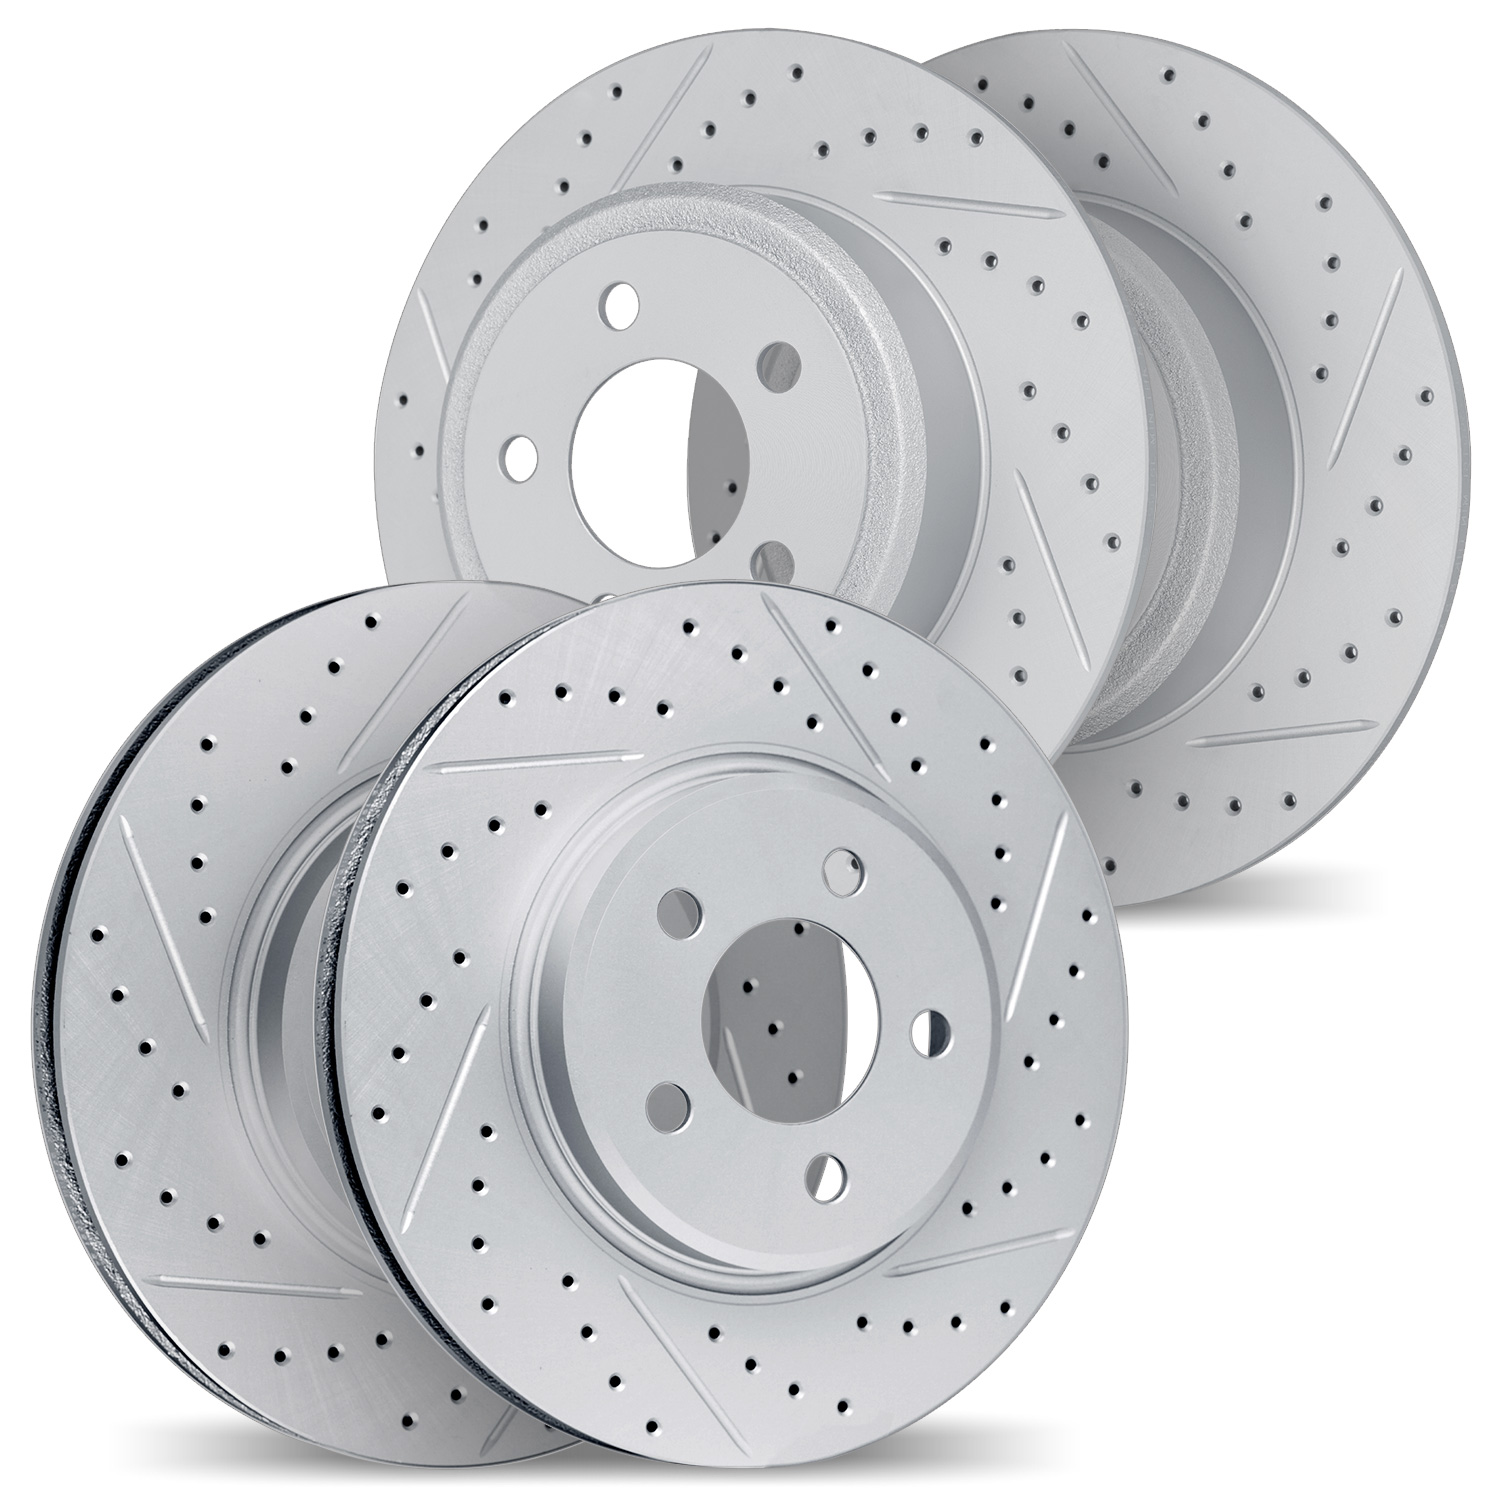 2004-21001 Geoperformance Drilled/Slotted Brake Rotors, Fits Select Kia/Hyundai/Genesis, Position: Front and Rear